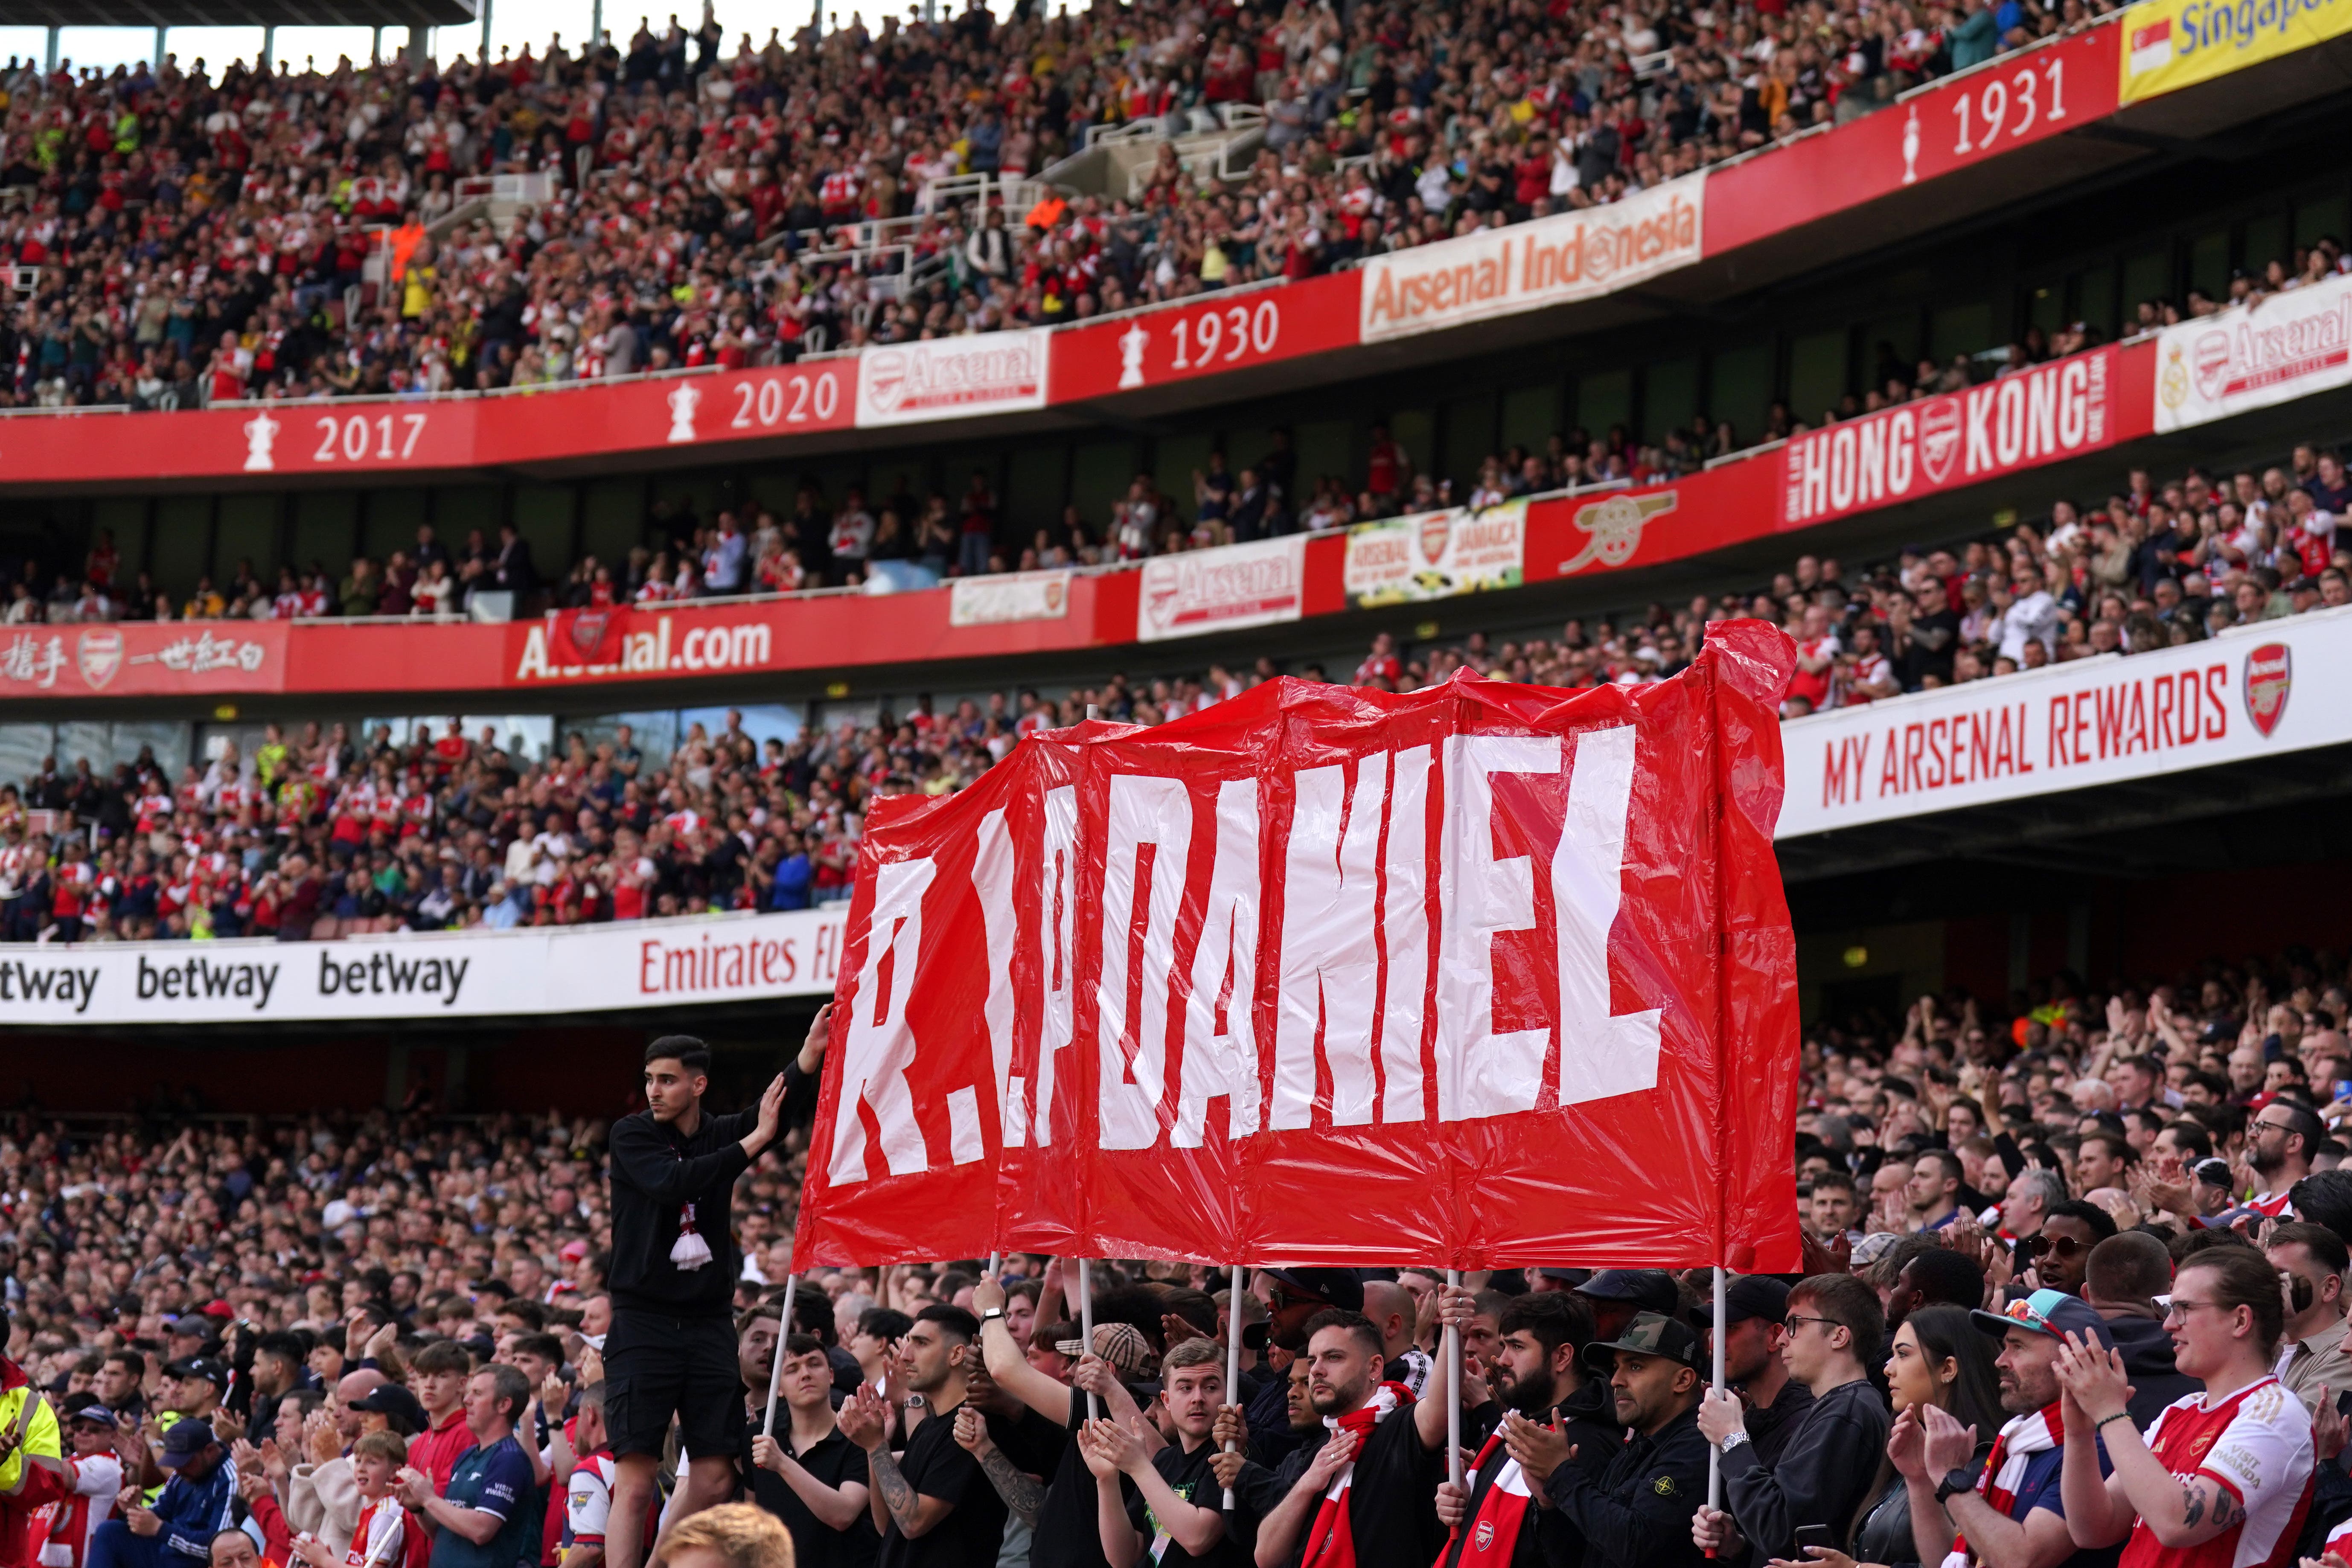 Fans hold up a banner on the 14th minute during Arsenal’s Premier League match against Bournemouth in memory of the 14-year-old